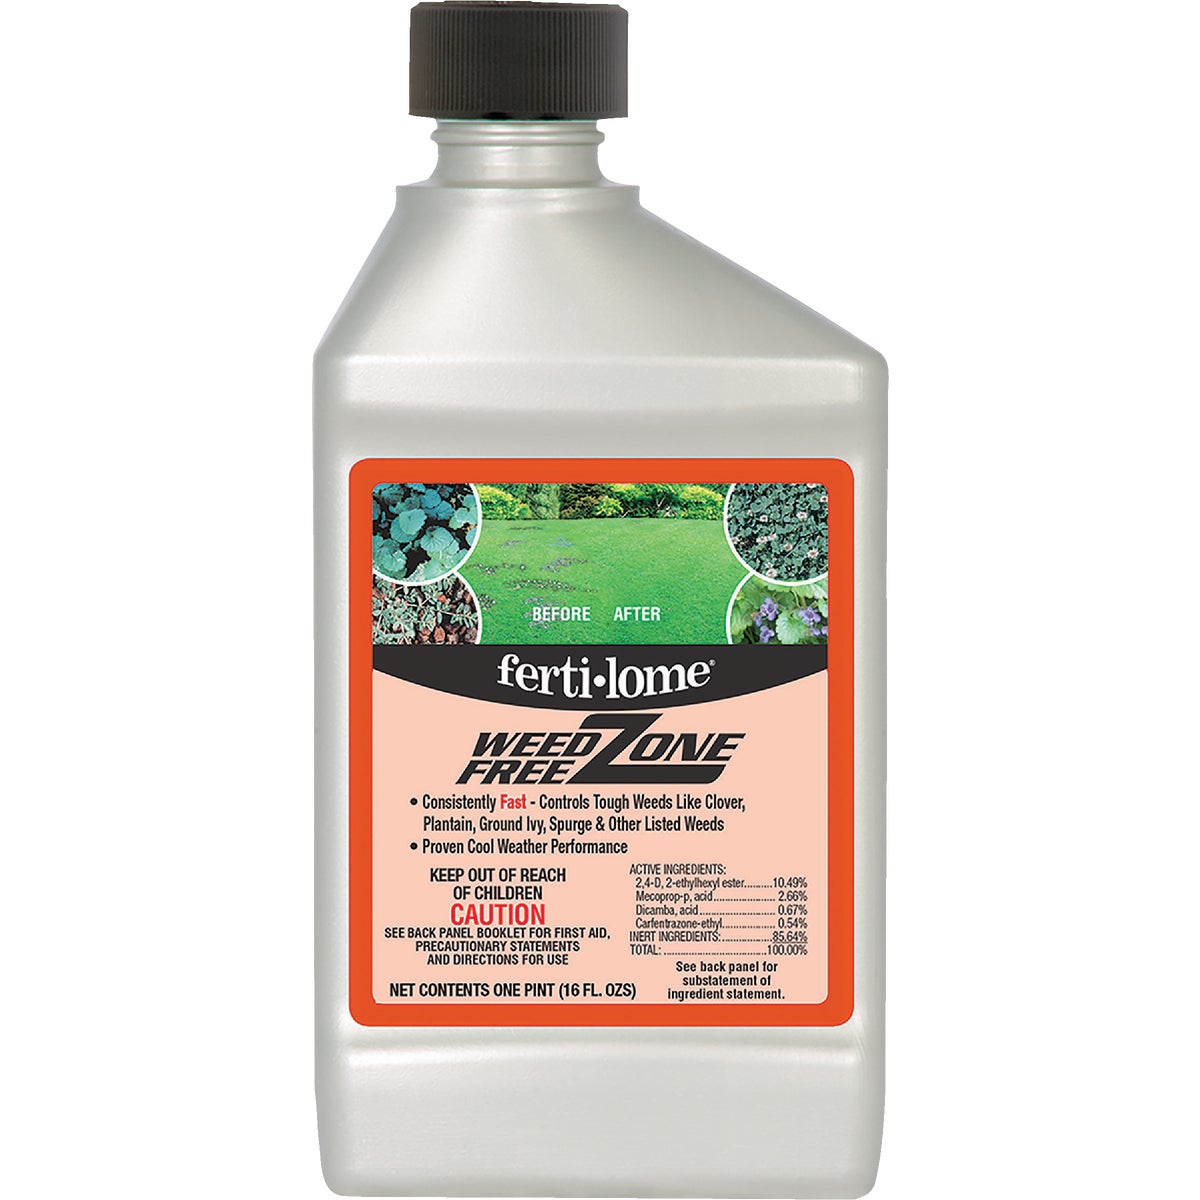 Ferti-lome Weed Free Zone 16 Oz. Concentrate Weed Killer